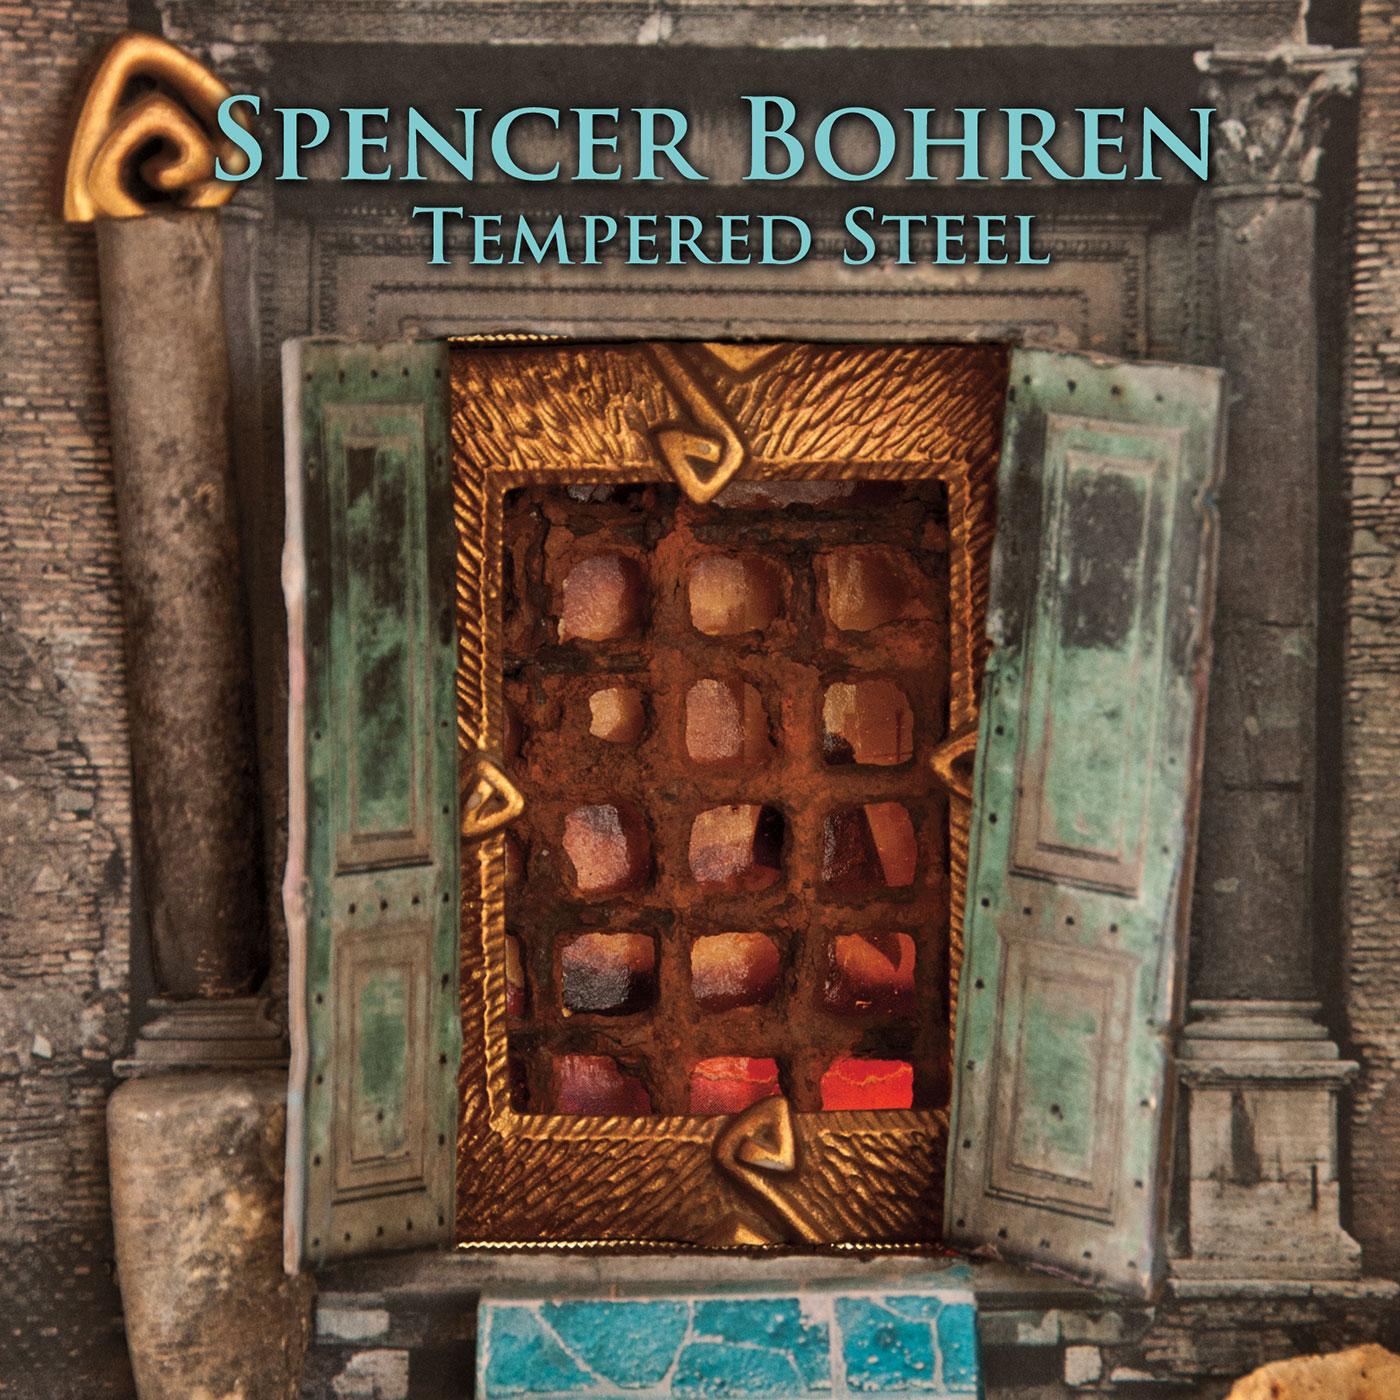 Tempered Steel (2013)